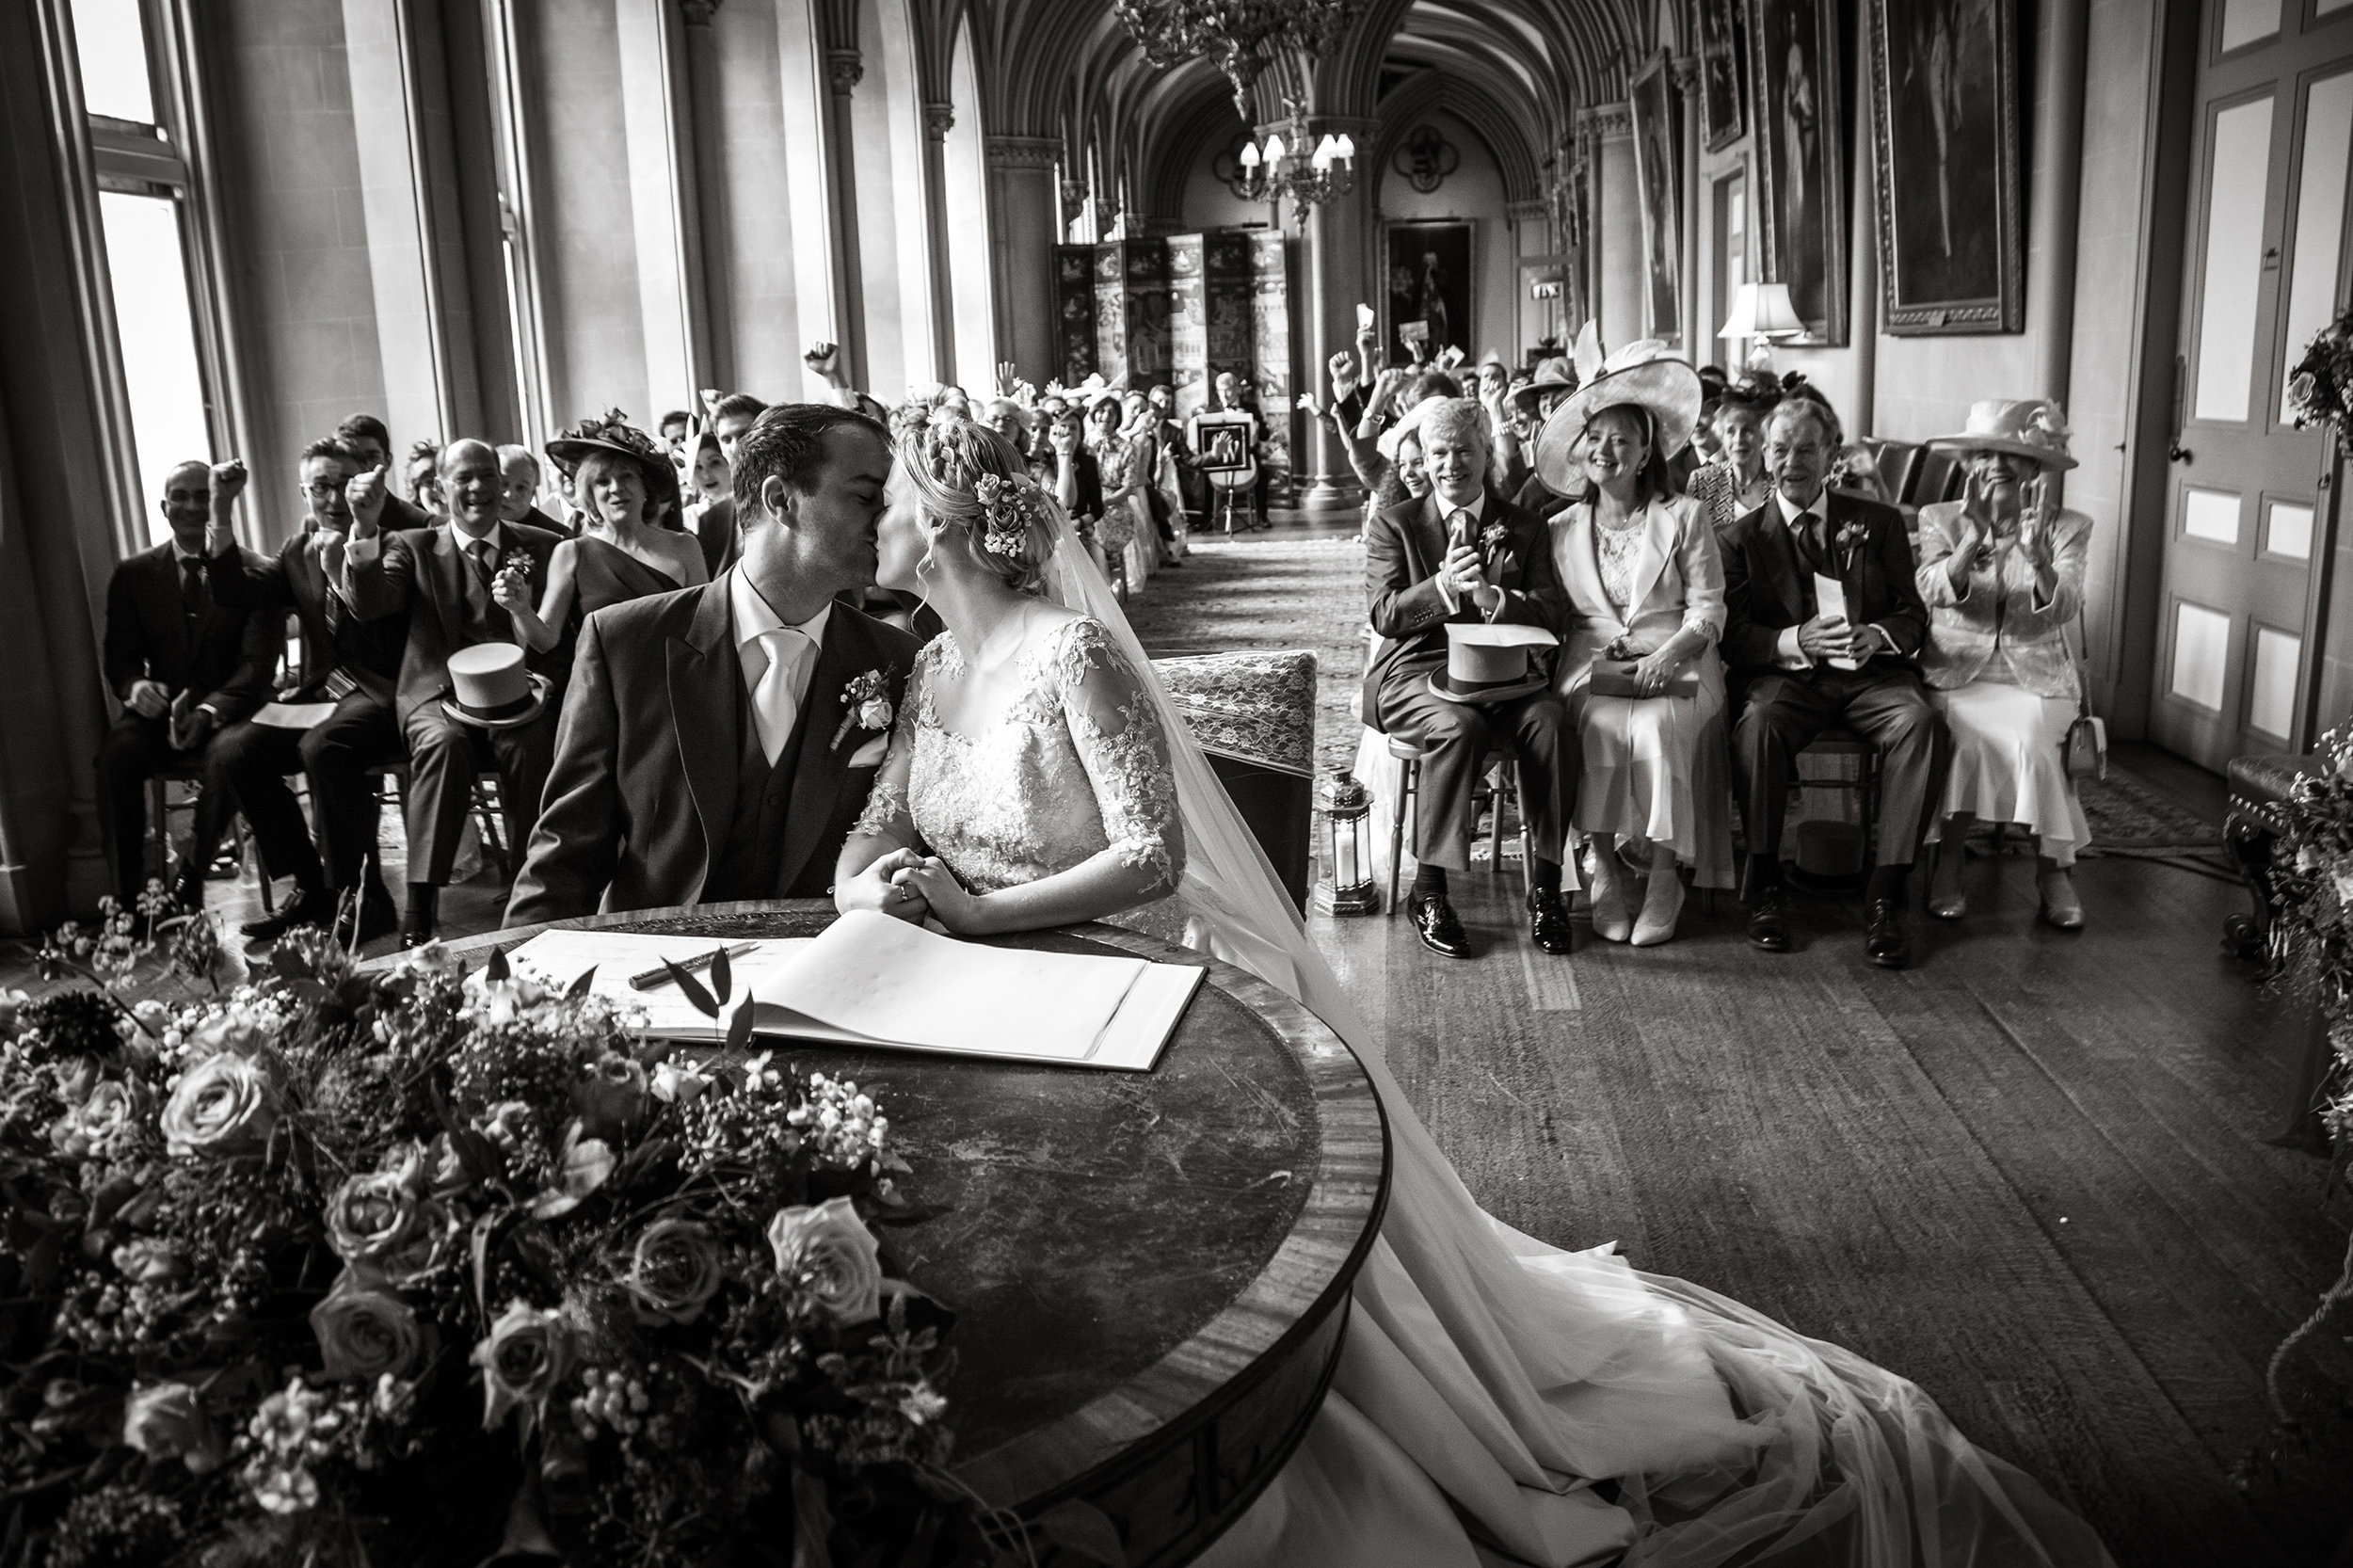 A traditional wedding with an American twist at the beautiful Belvoir Castle